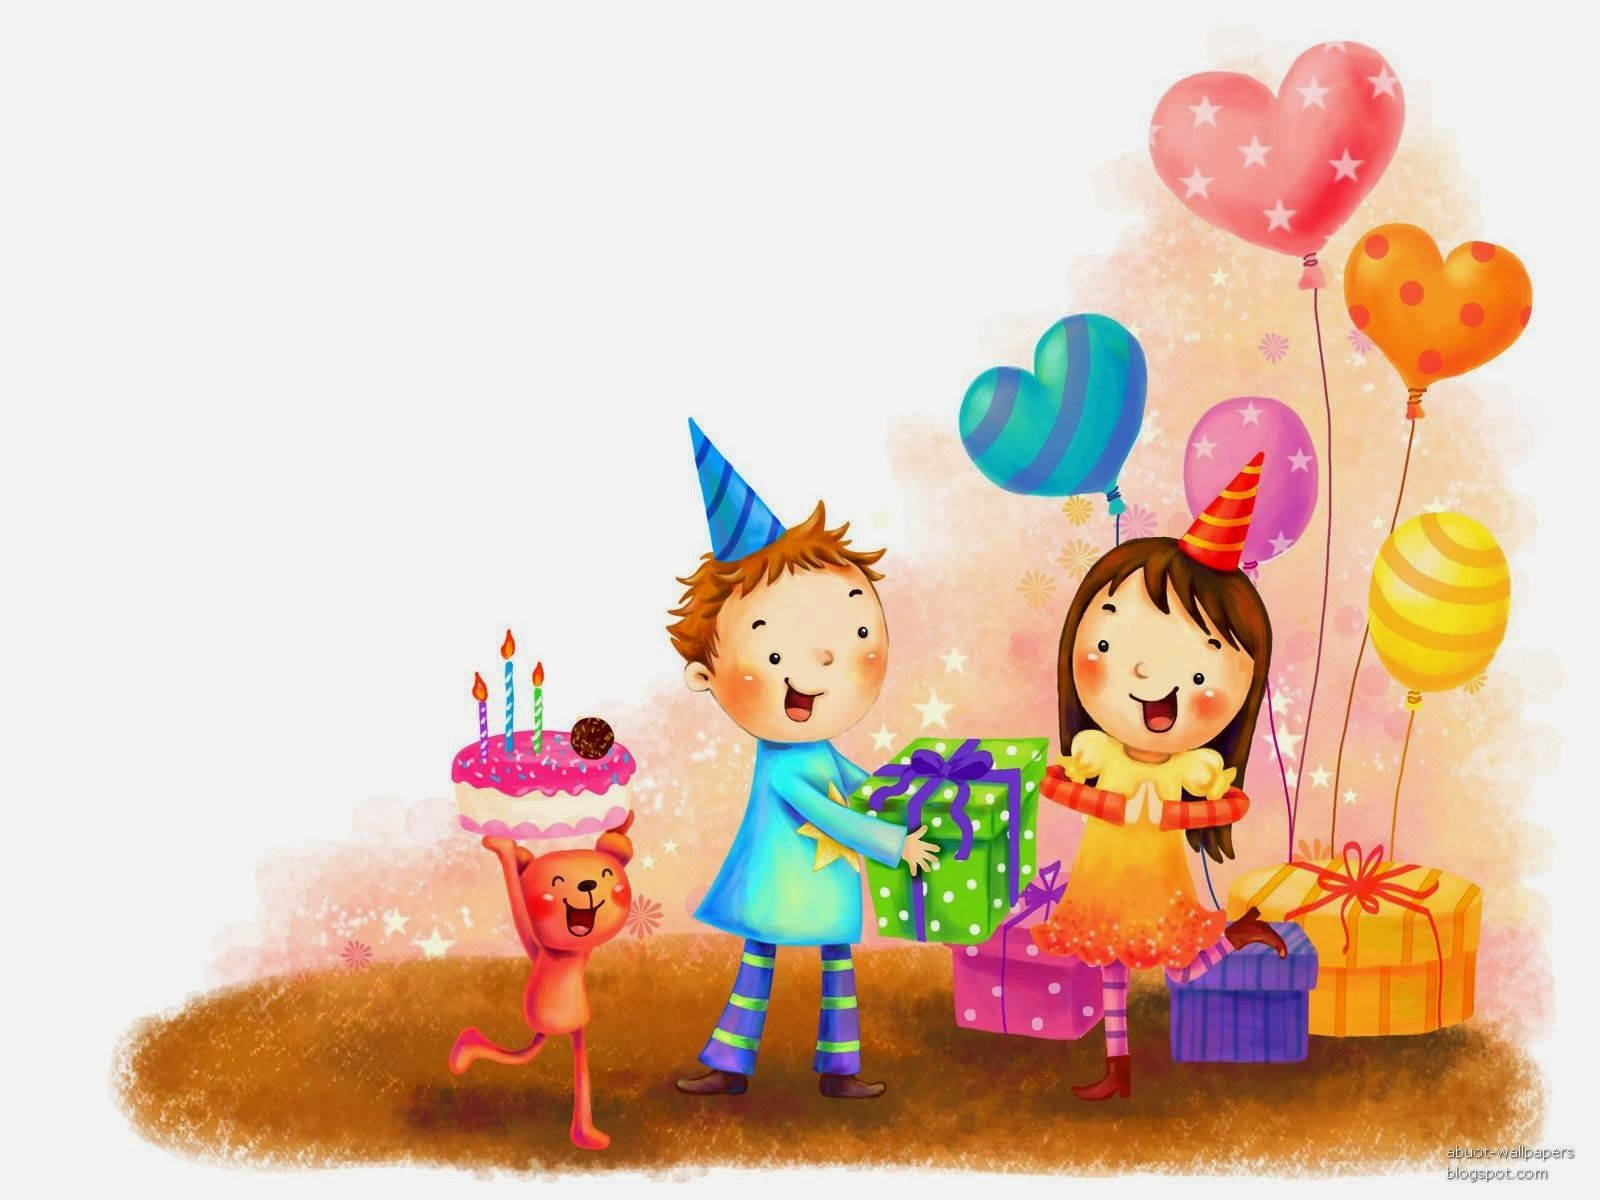 about wallpaper: Cute Happy Birthday Heart Greetings Cards to wish Birthday to kids